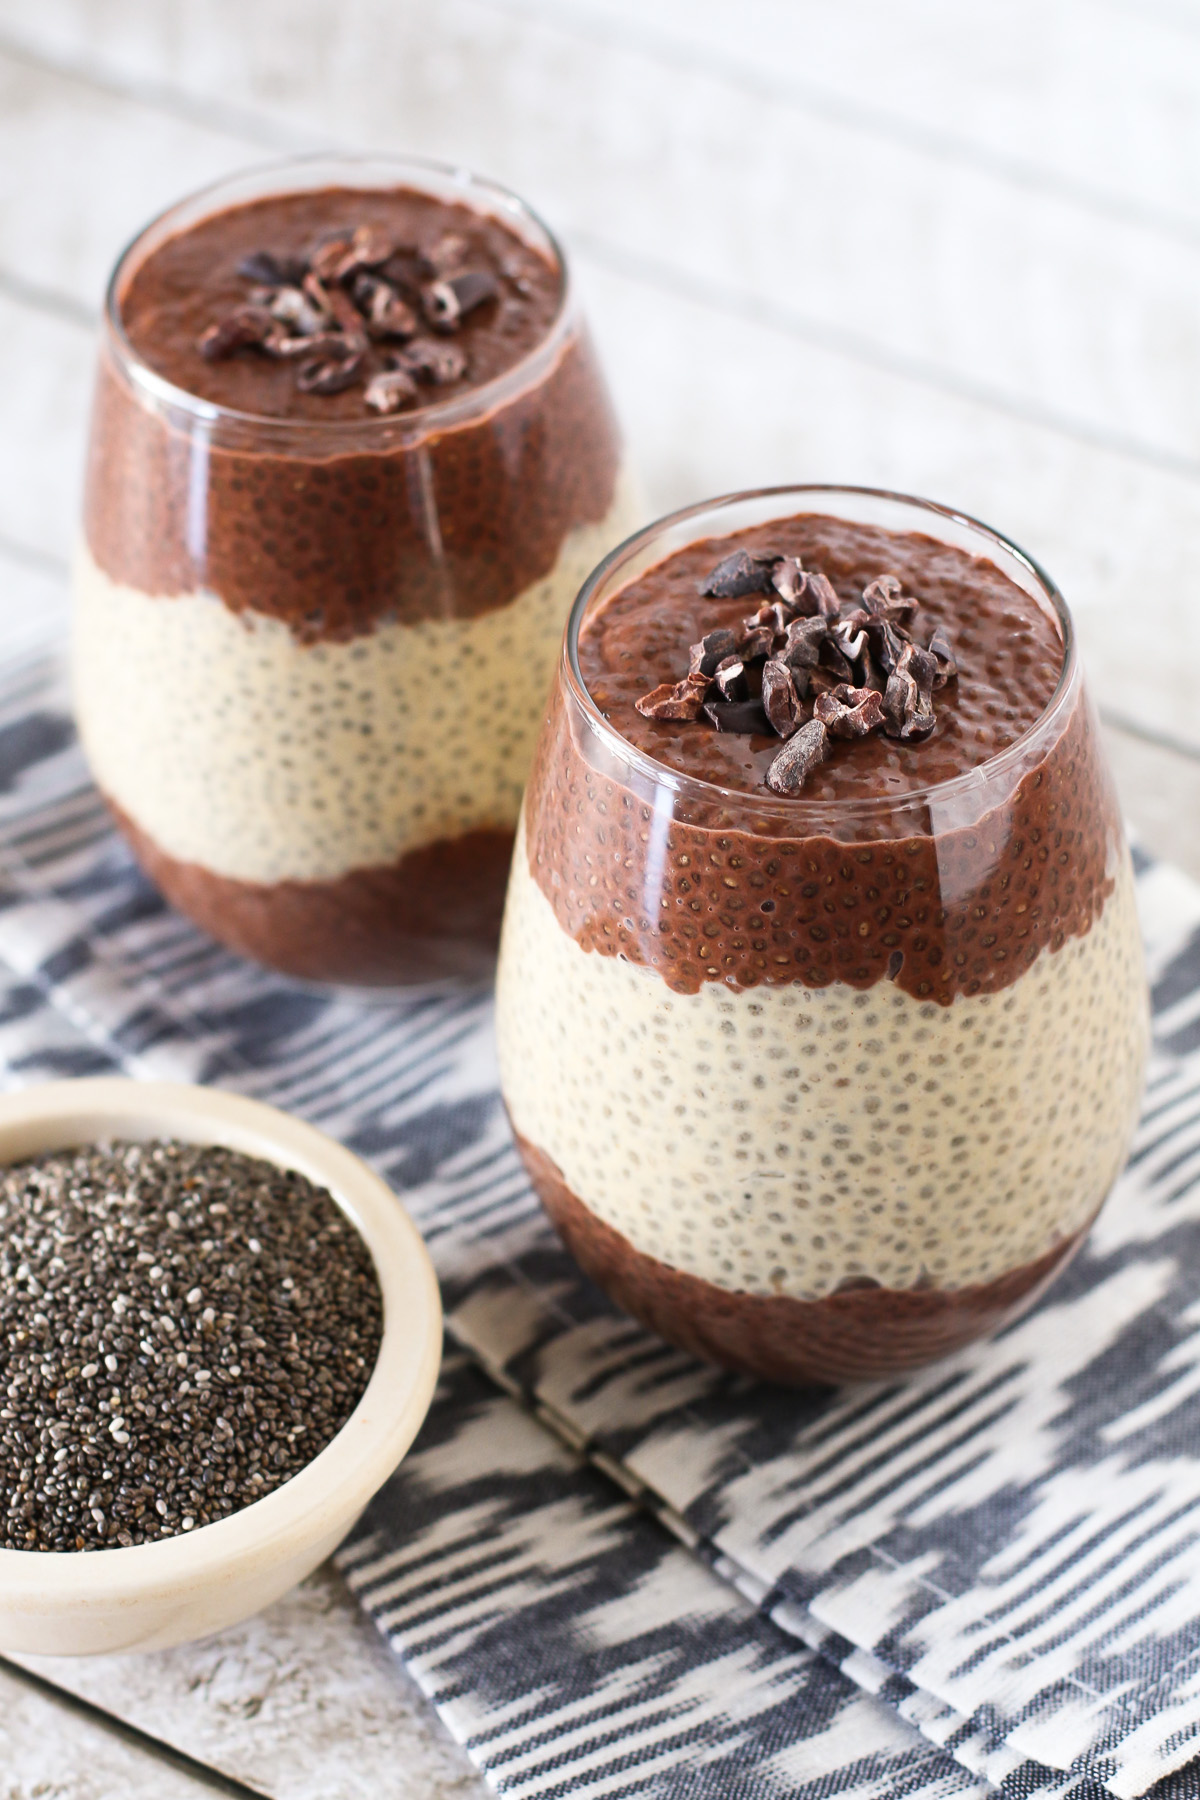 Dairy Free Chocolate Peanut Butter Chia Pudding. Layers of creamy chocolate and peanut butter chia seed pudding. A decadent, guilt-free treat!